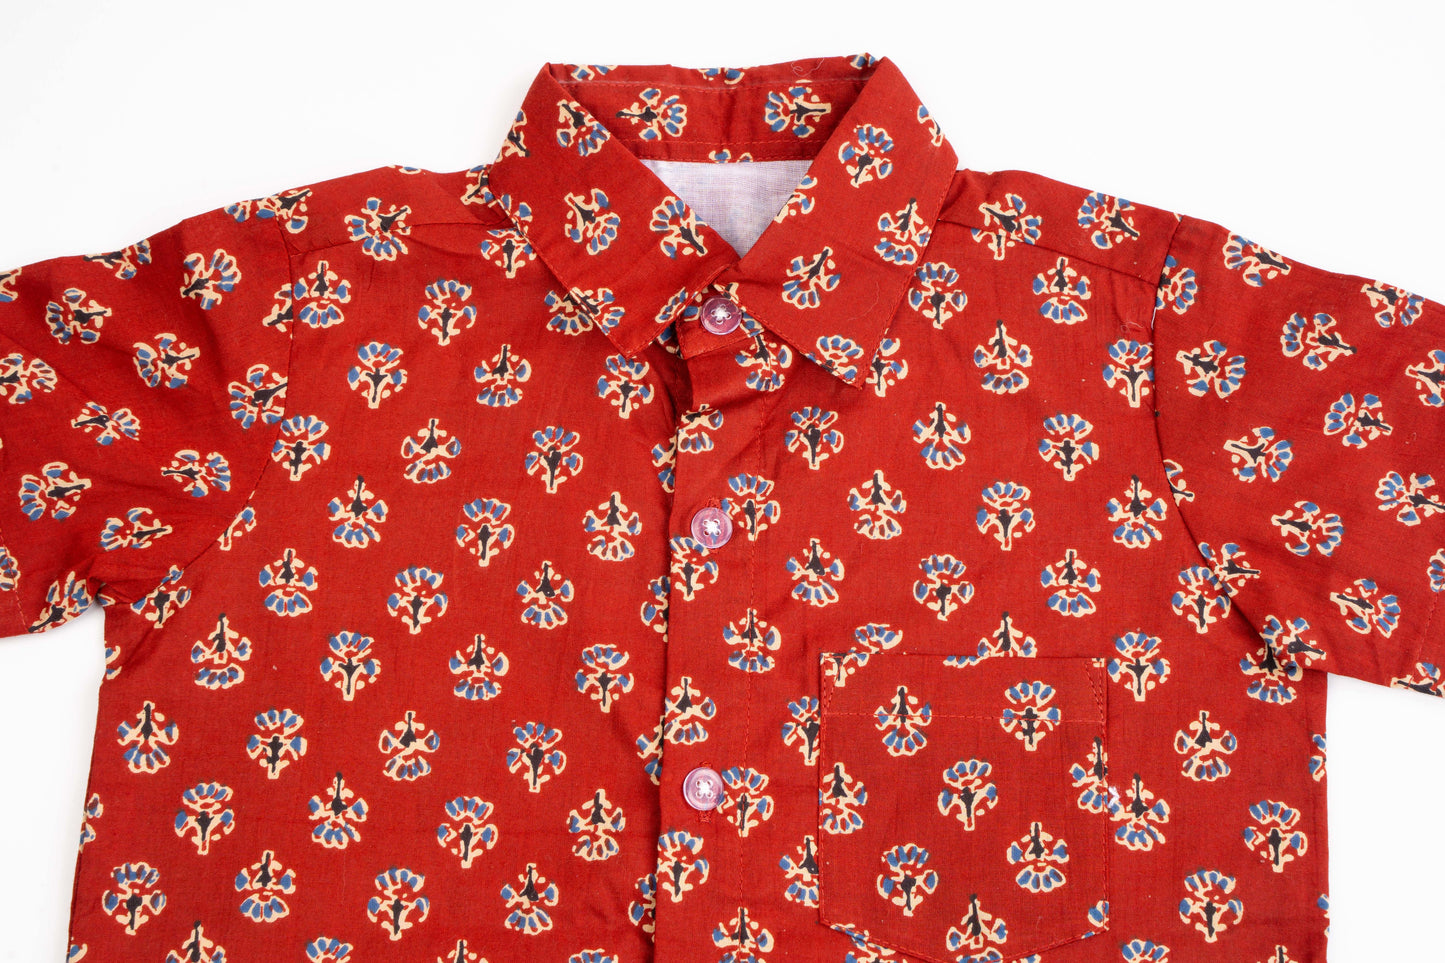 Cotton Shirt for Boys | Standard Collar - Floral Print | Rusty Red